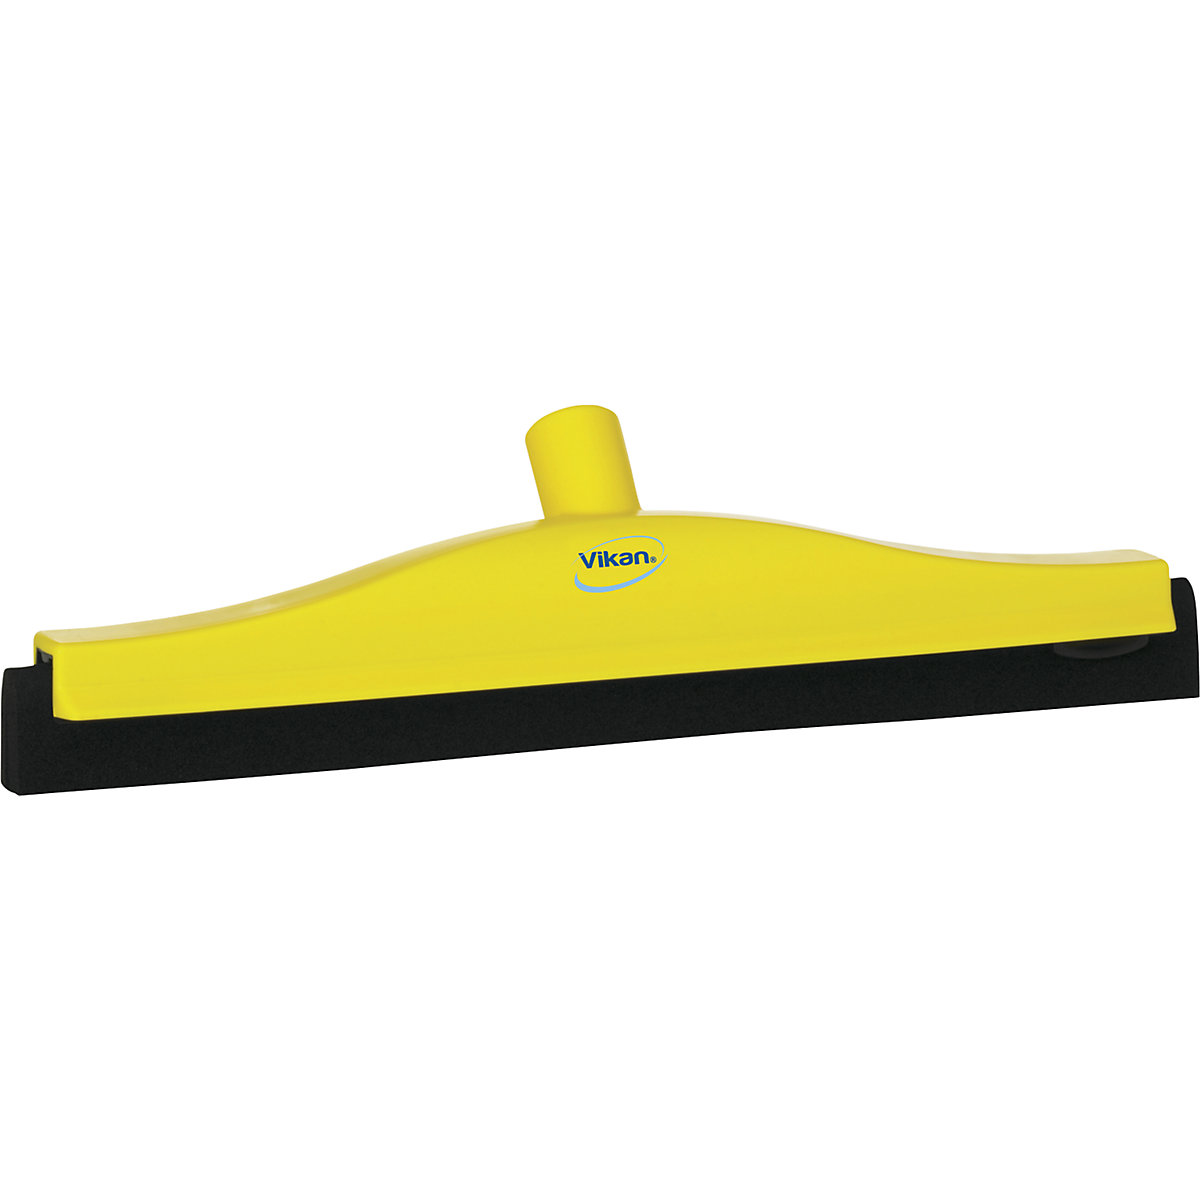 Water wiper with replaceable cartridge – Vikan